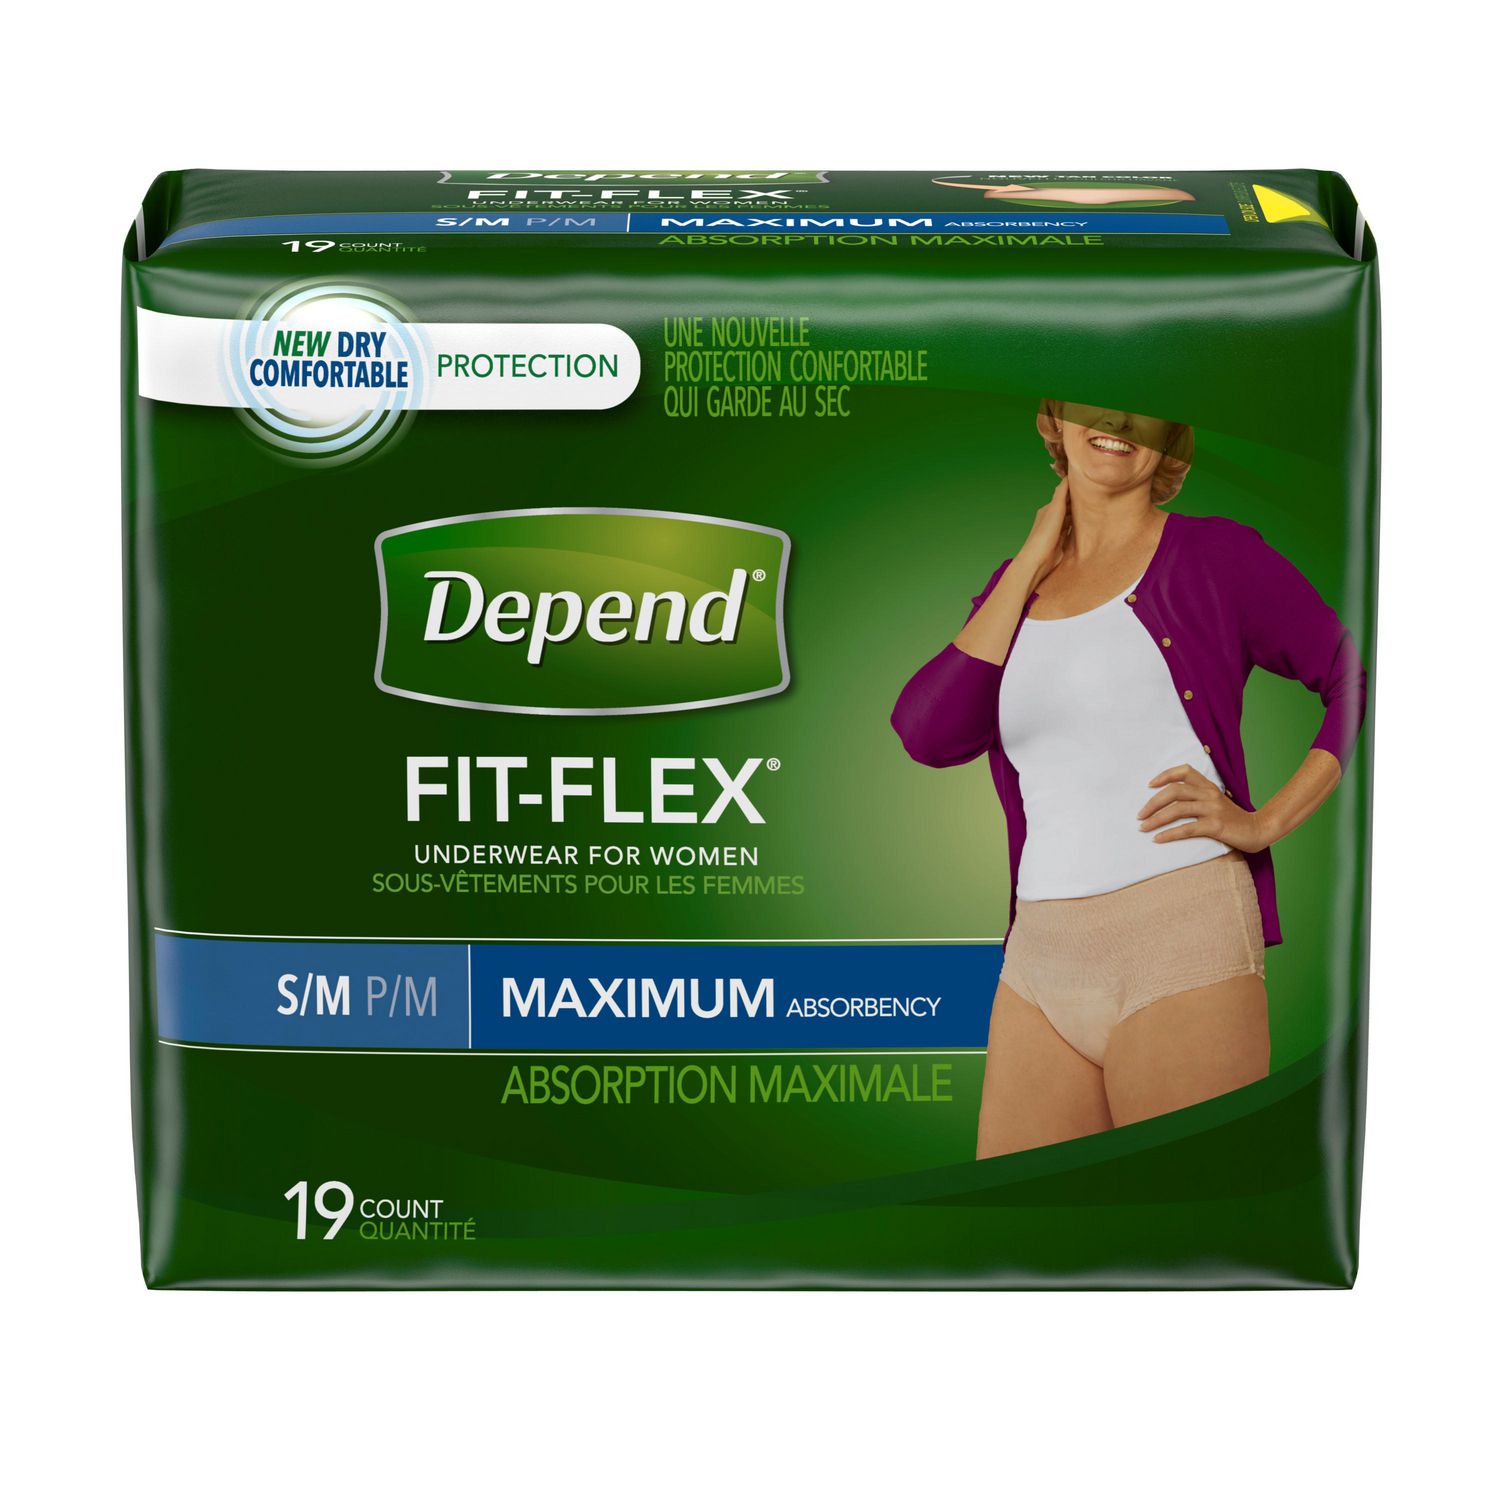 Depend Fresh Protection Adult Incontinence Maximum Underwear - XL